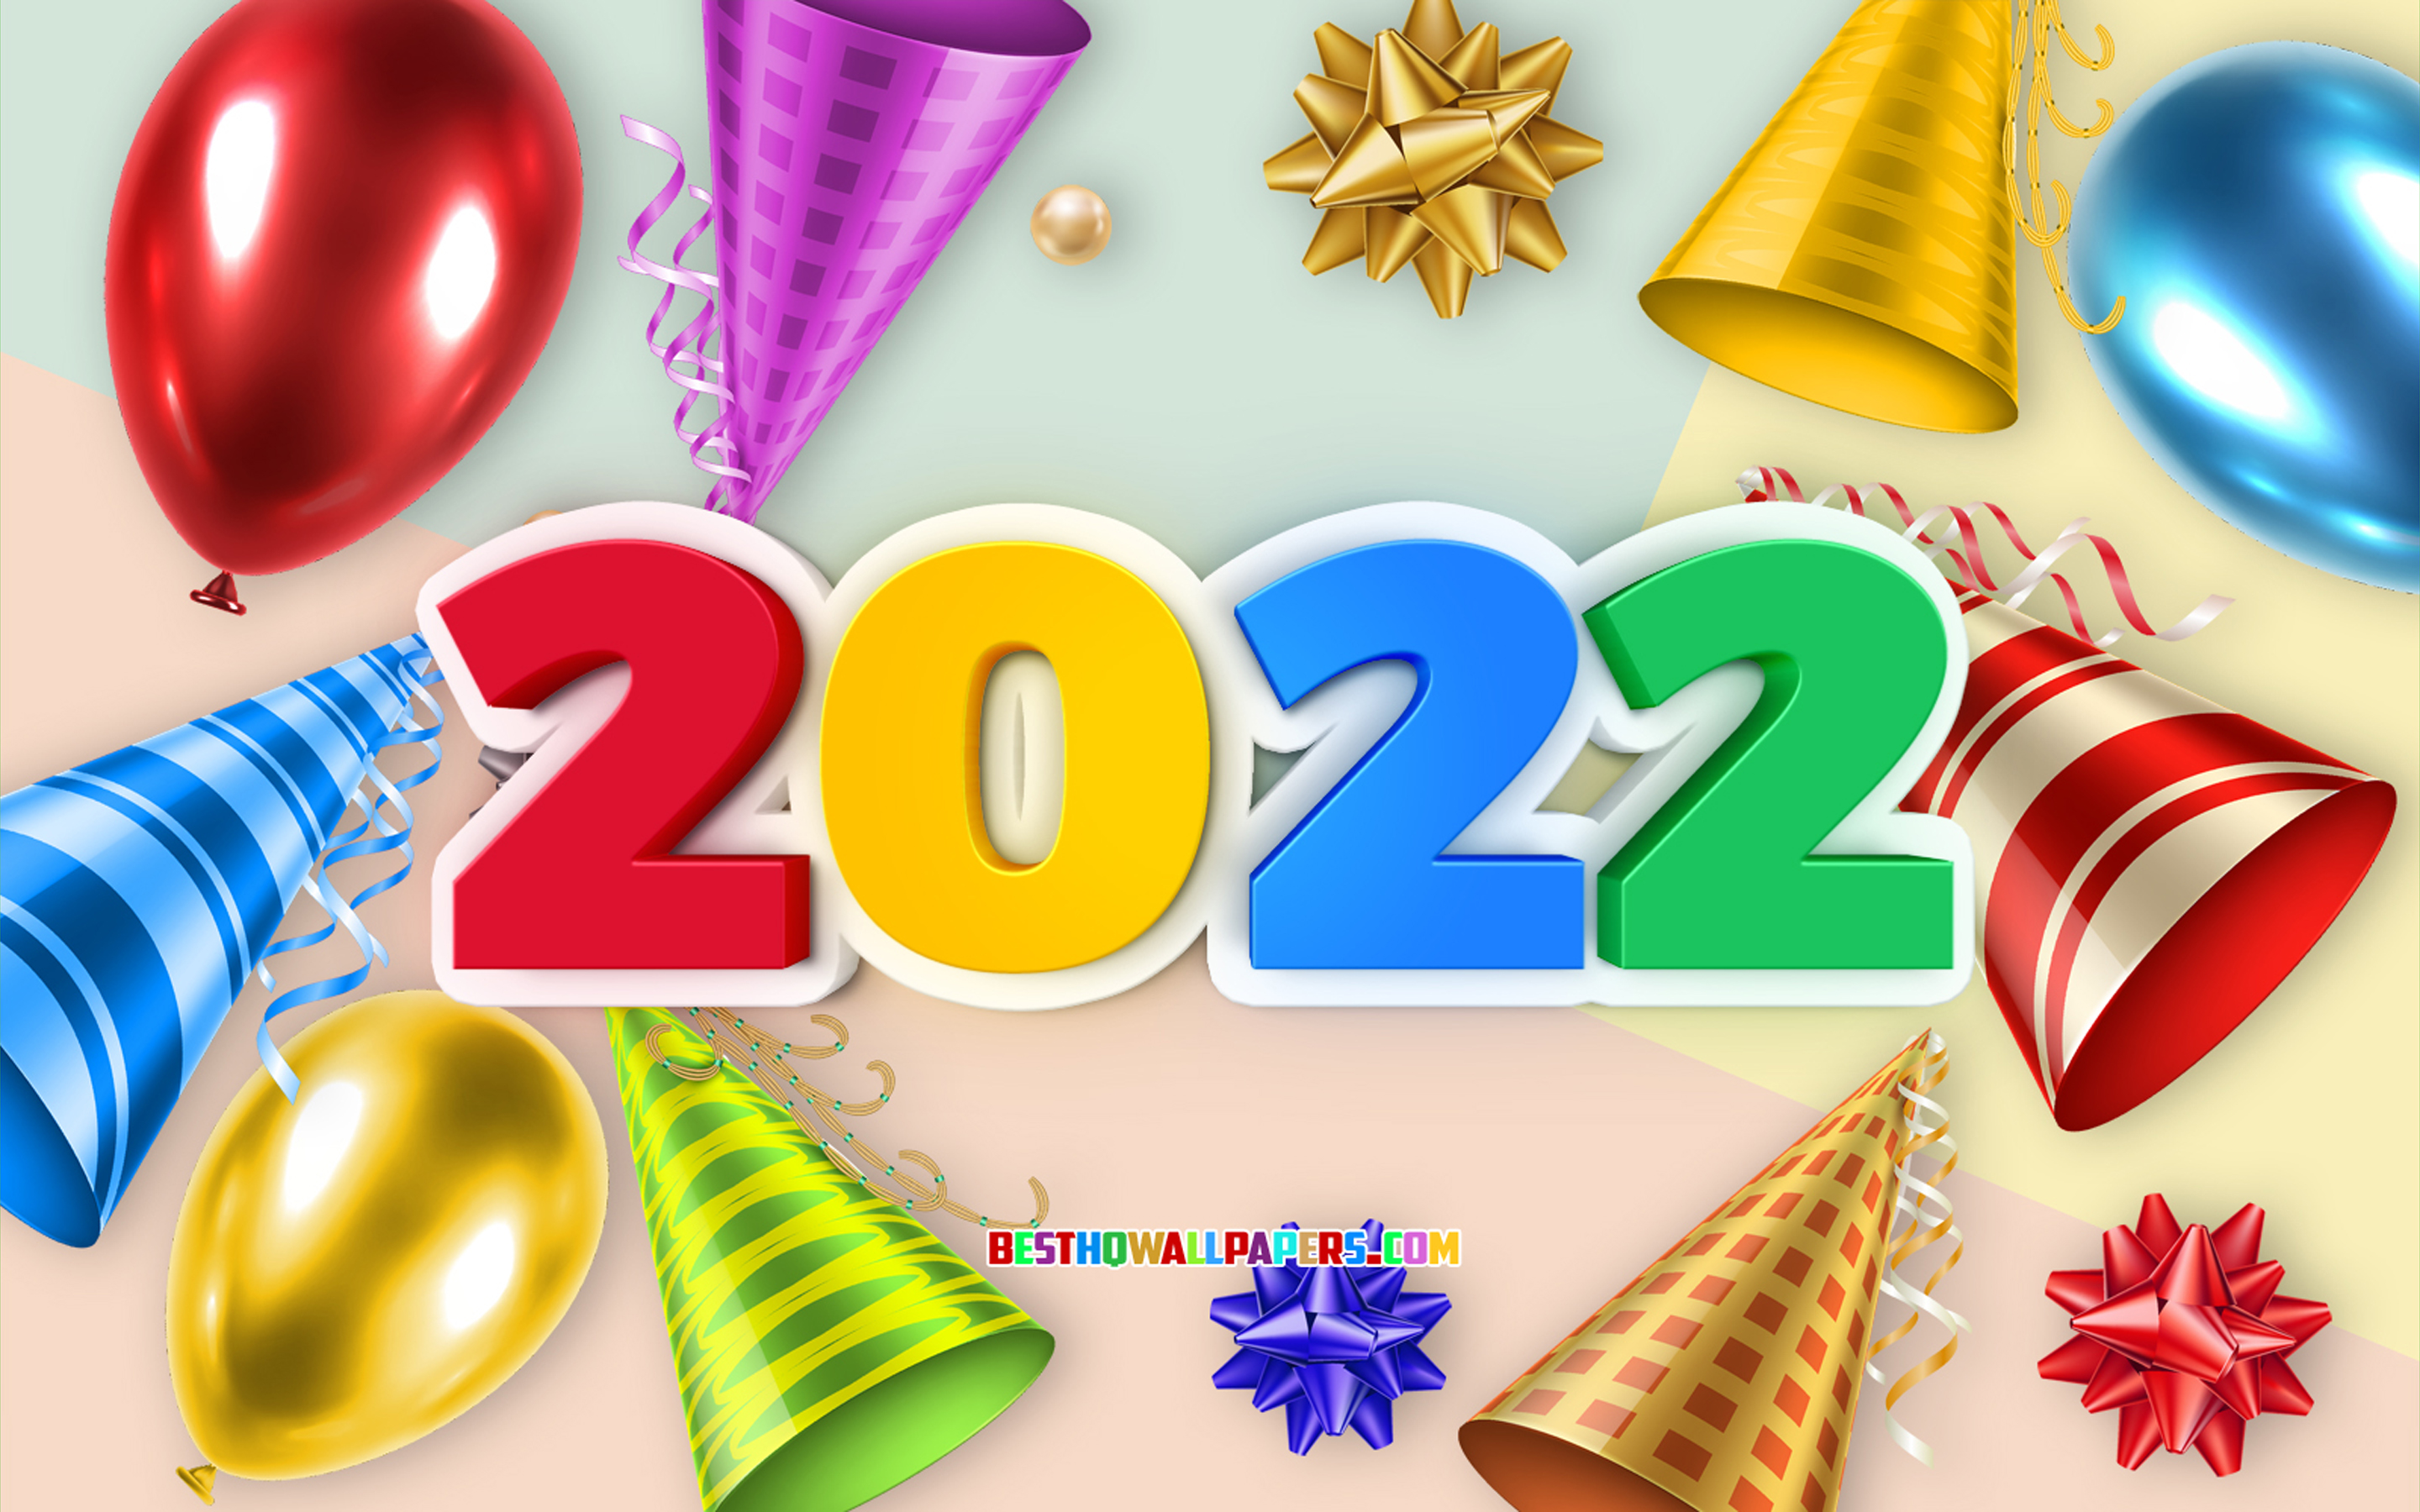 Wallpapers holiday new year 2022 atmosphere on the desktop